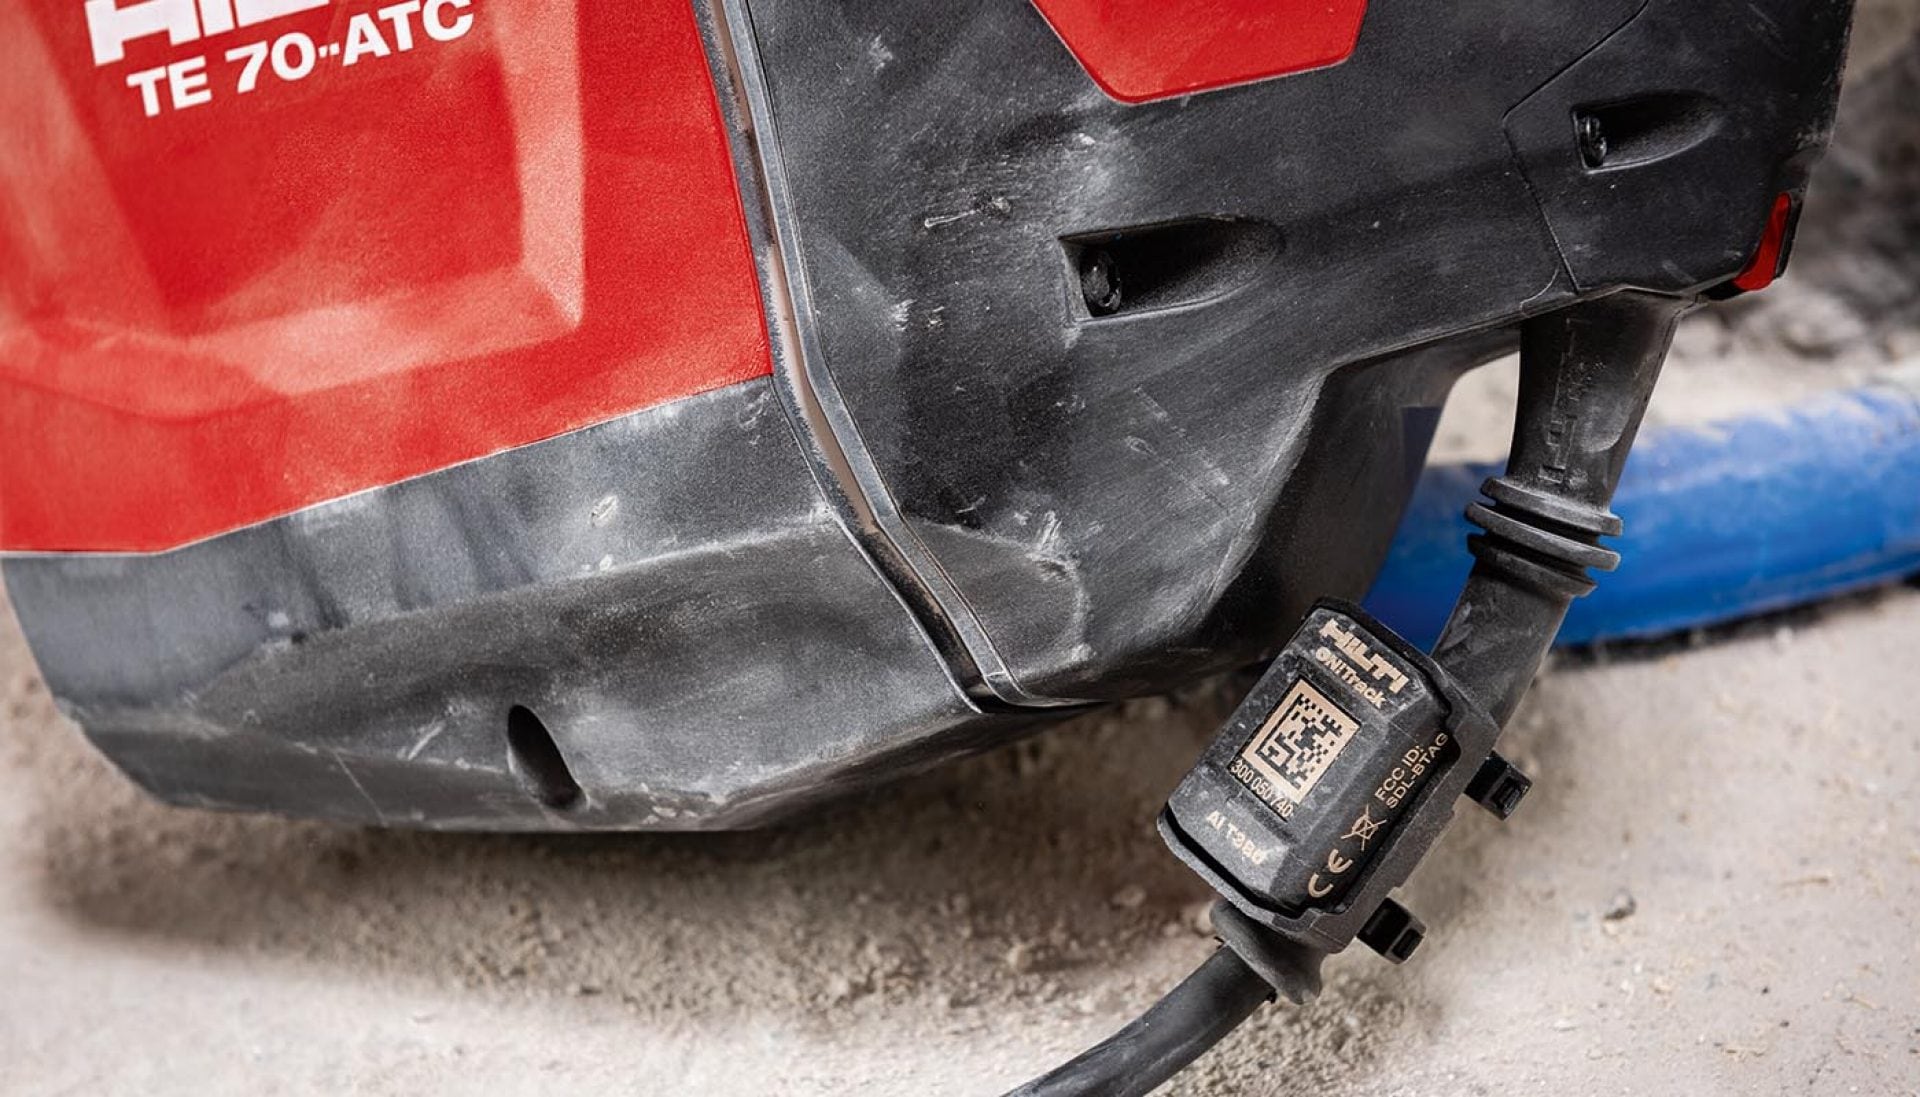 Hilti TE 70-ATC with an ON!Track tag on its power cord